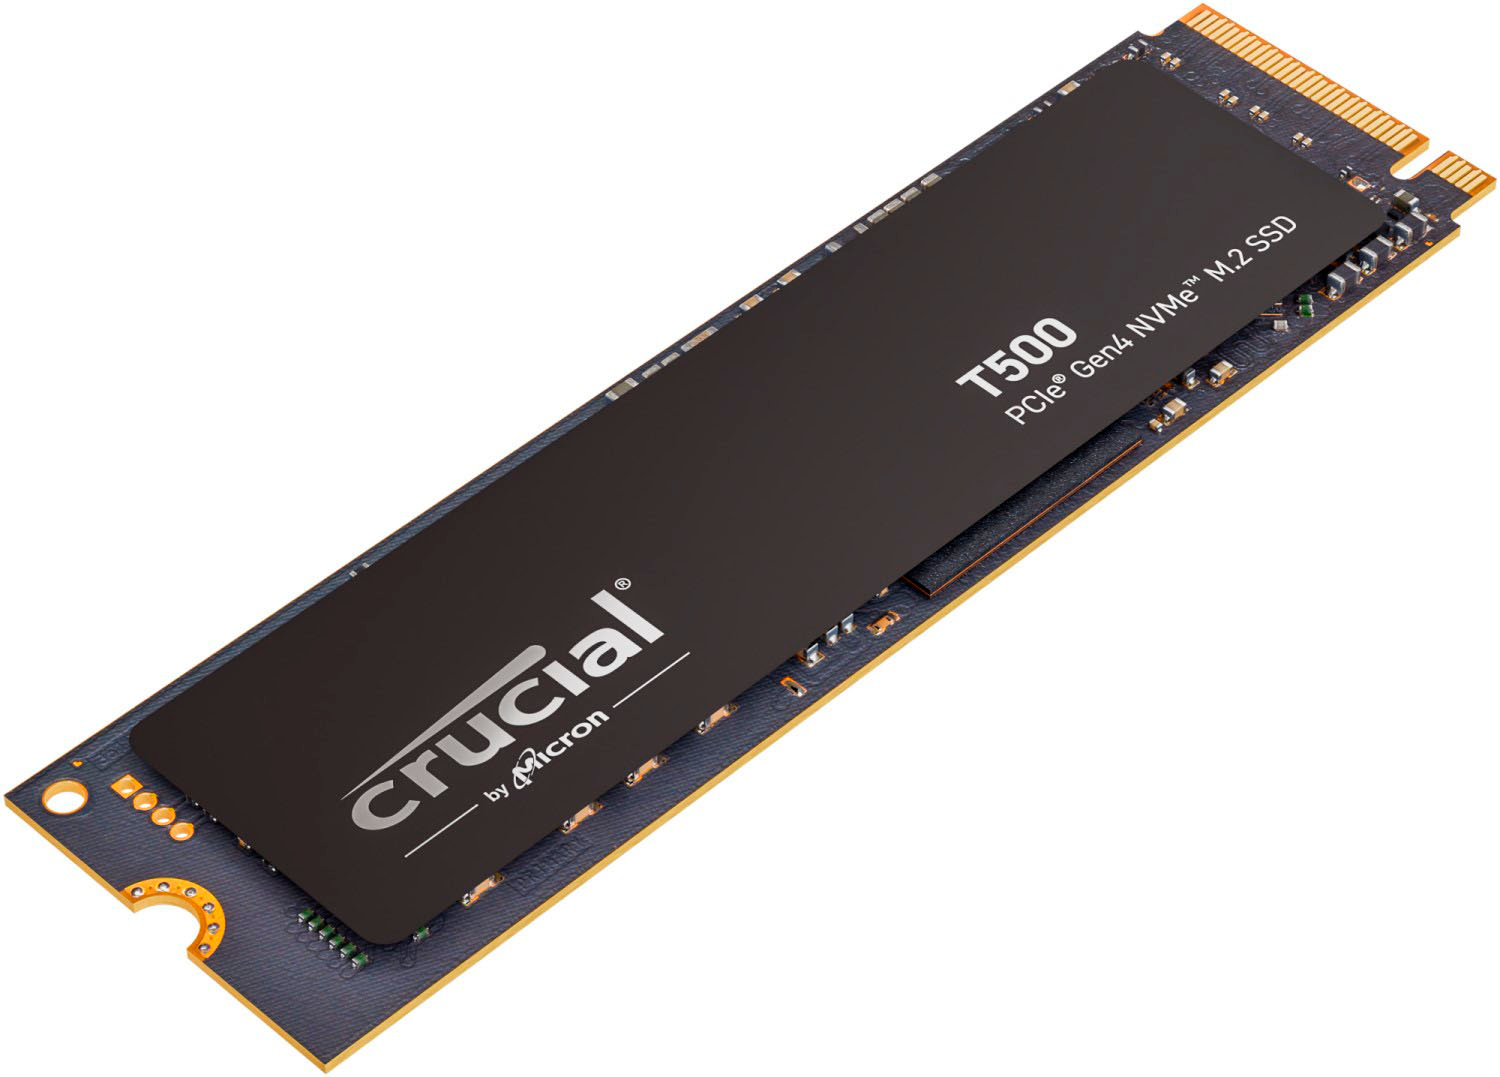 Crucial T500 1TB Gen4 NVMe M.2 Internal Gaming SSD, Up to 7300MB/s, laptop  & desktop Compatible + 1mo Adobe CC All Apps - CT1000T500SSD8 